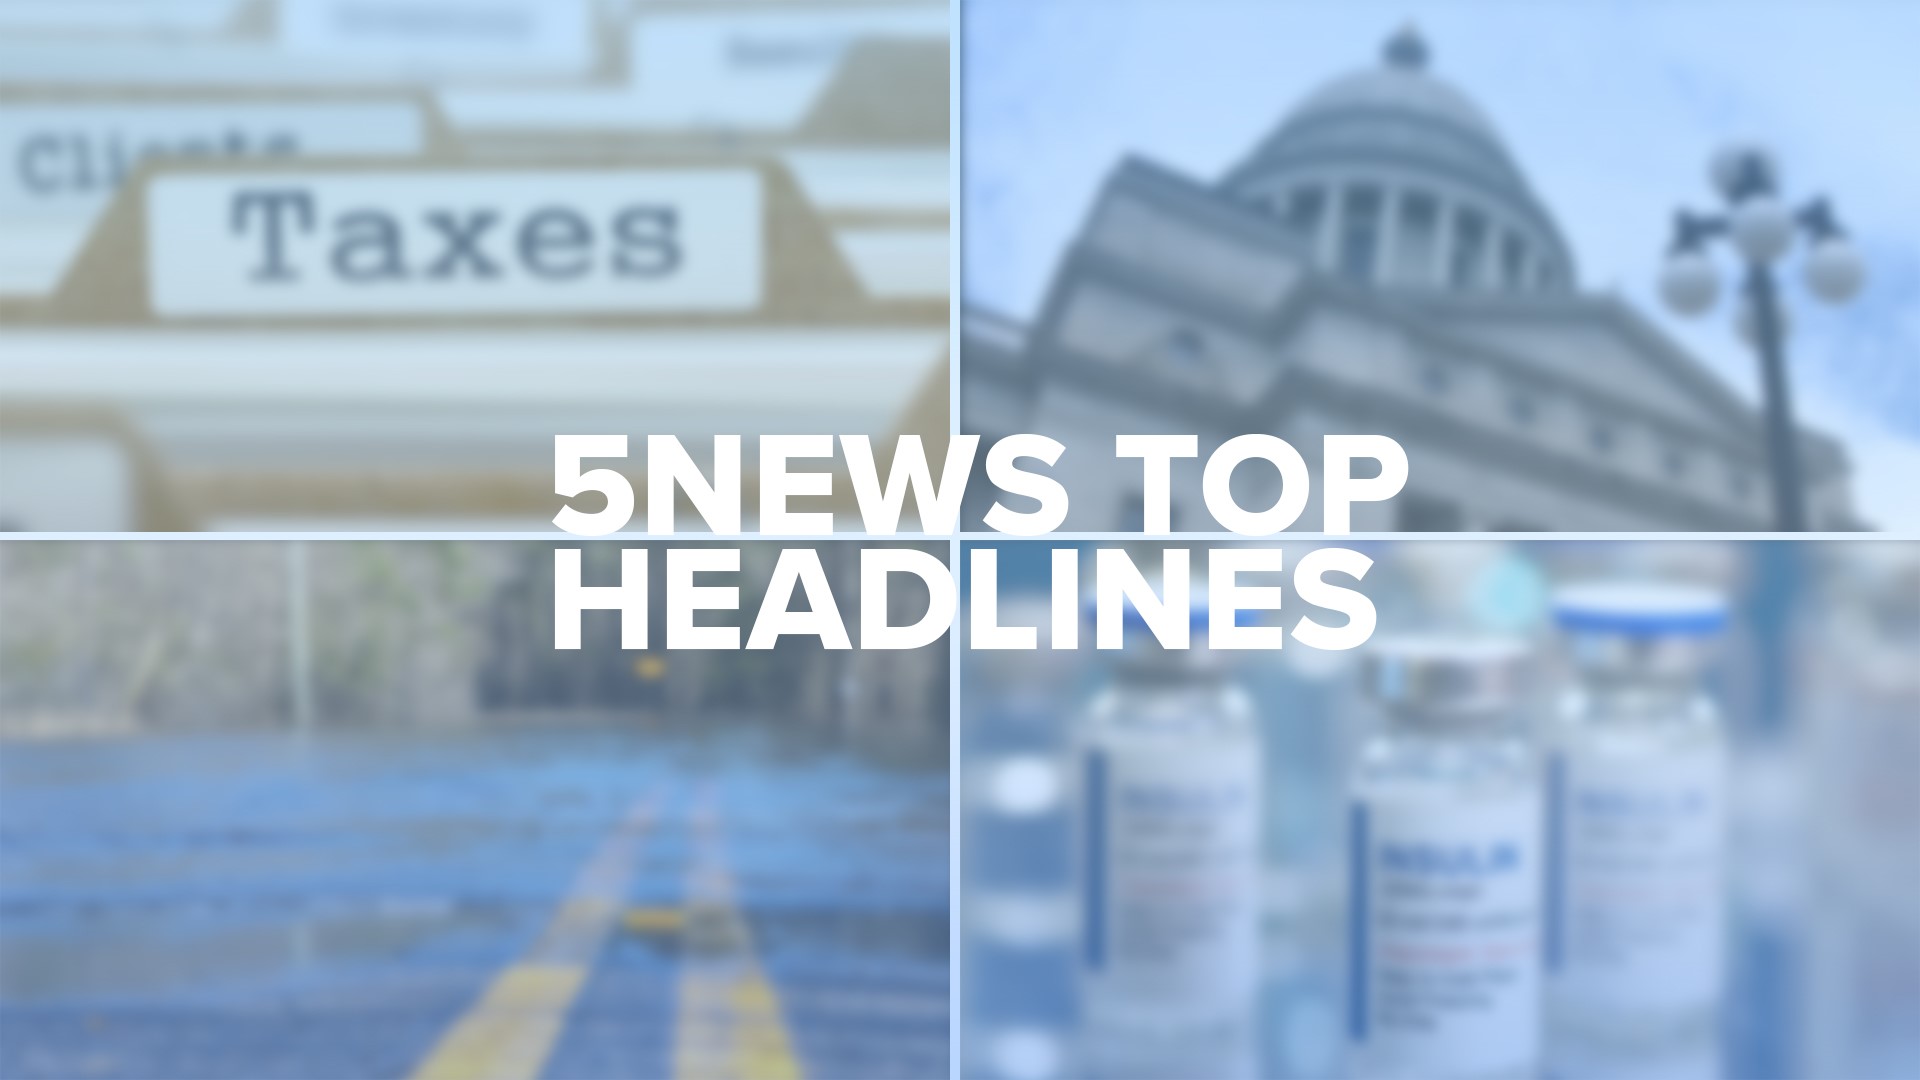 Check out some of today's top headlines for local news across our area! 📰